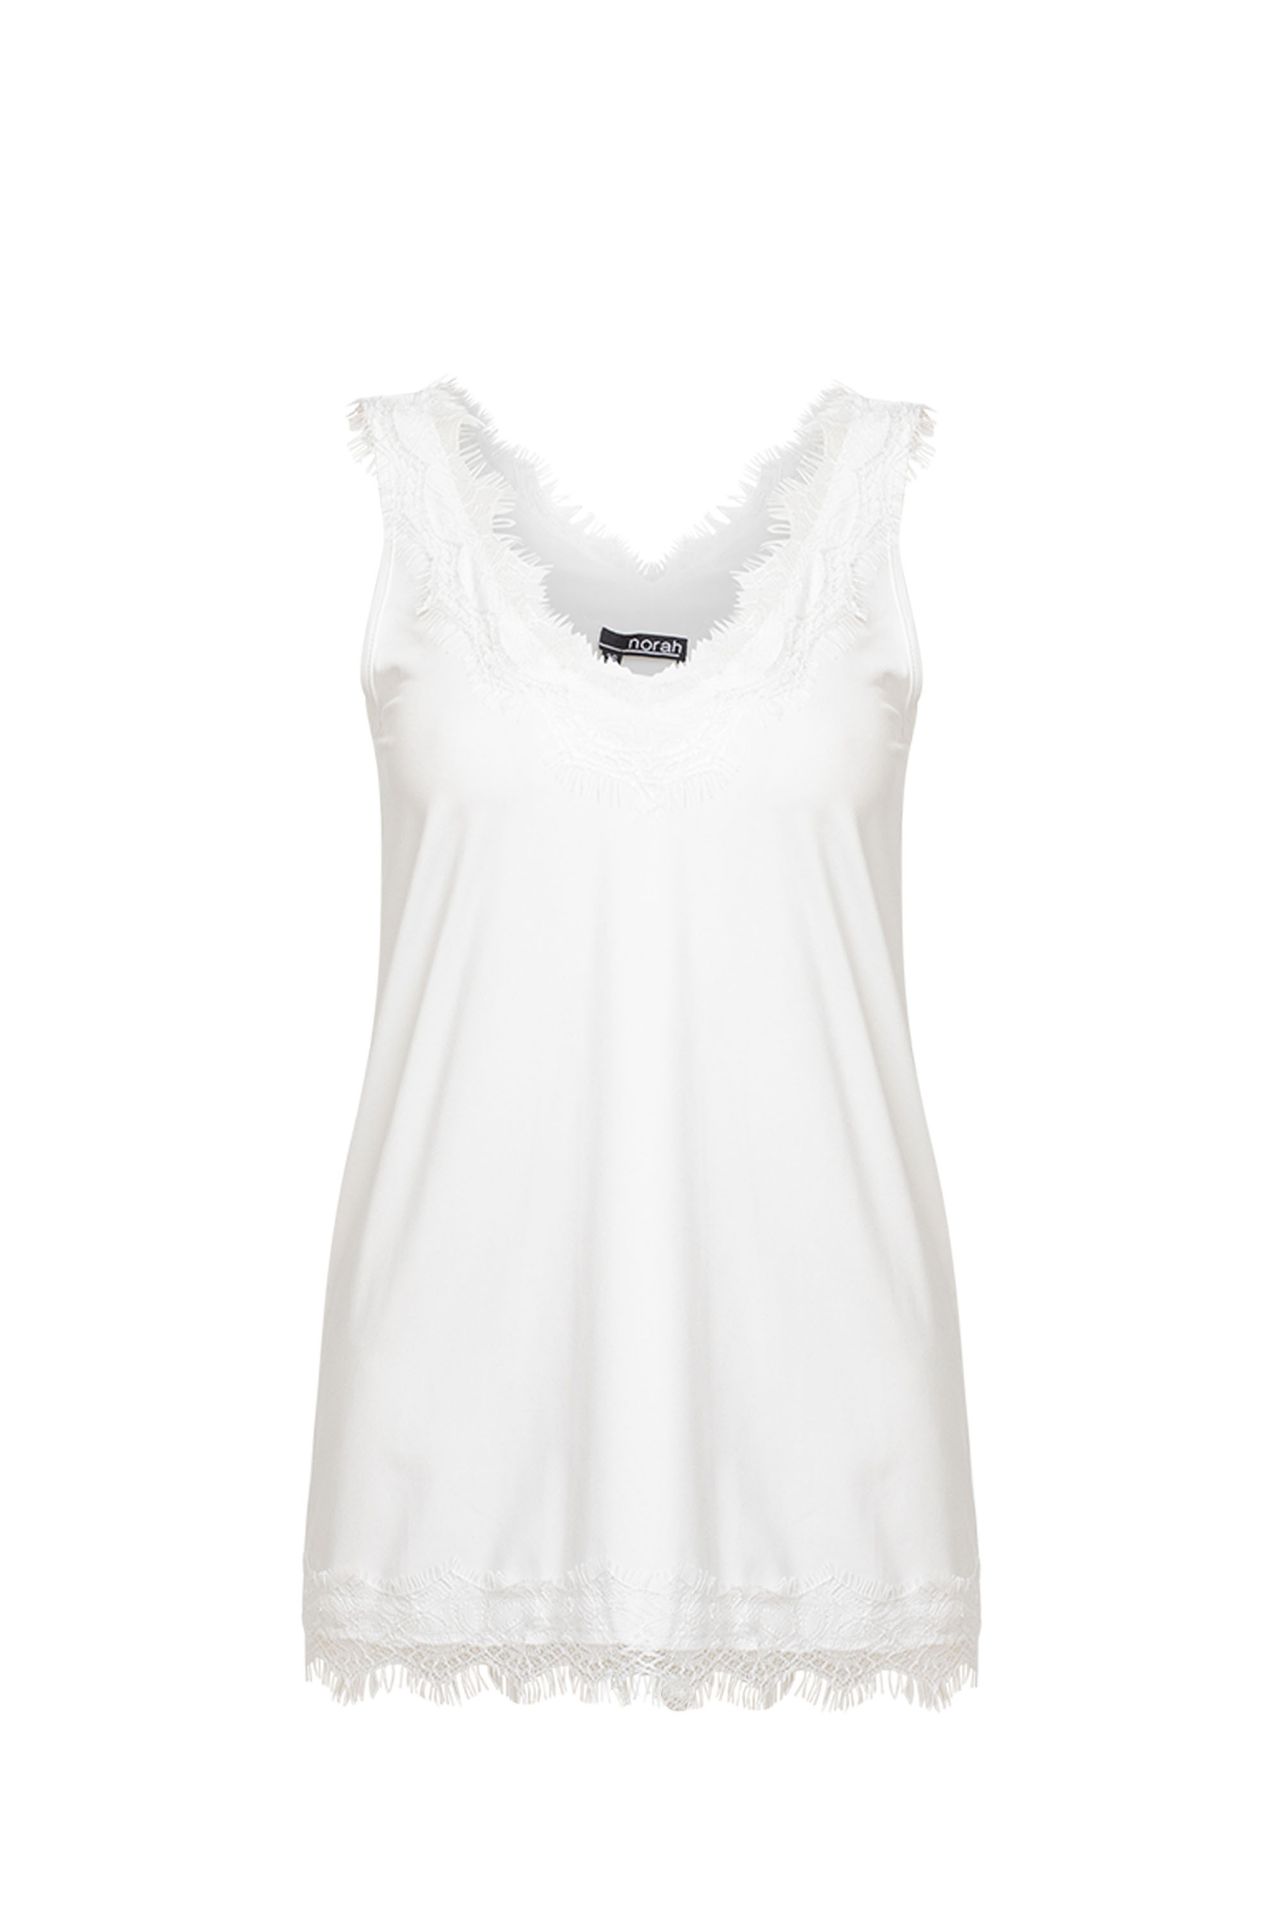 Norah Top wit off-white 209570-101